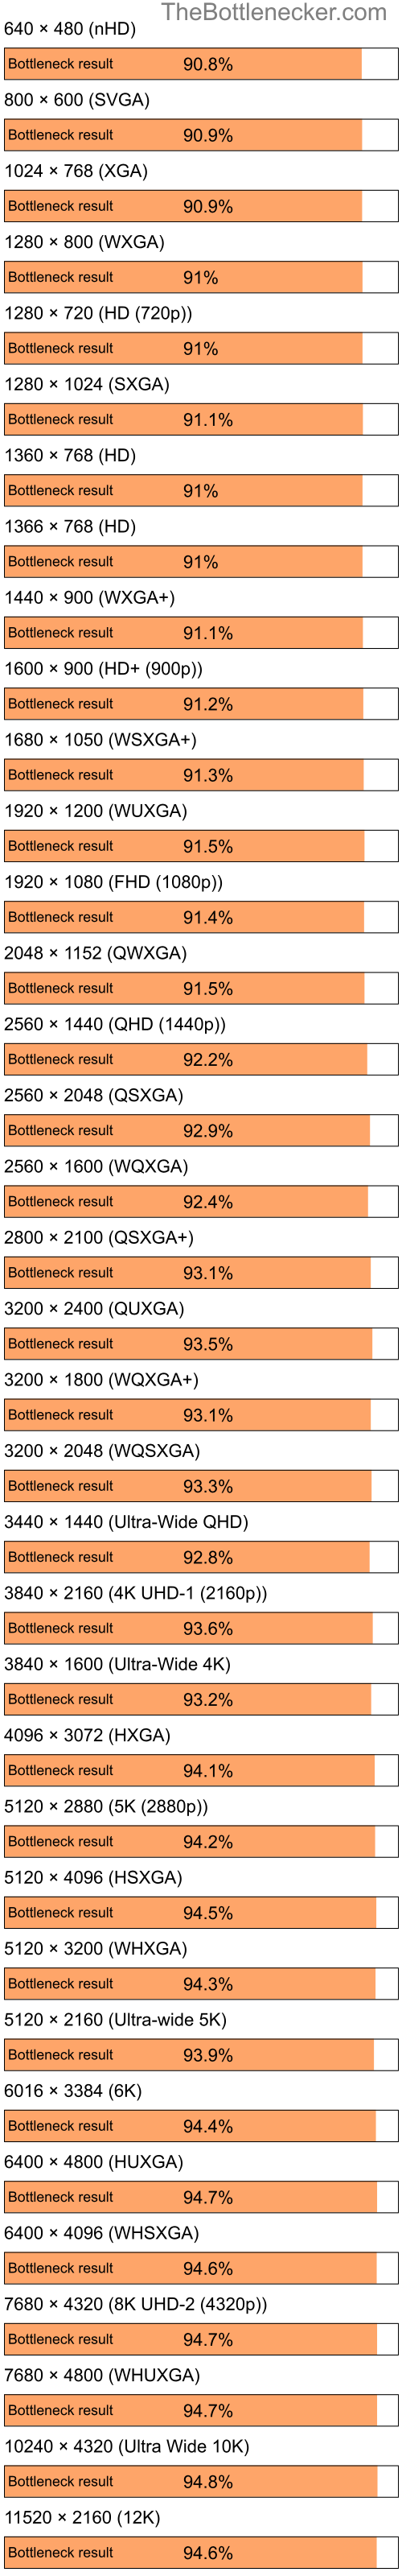 Bottleneck results by resolution for Intel Atom N270 and AMD Mobility Radeon 9000 in7 Days to Die